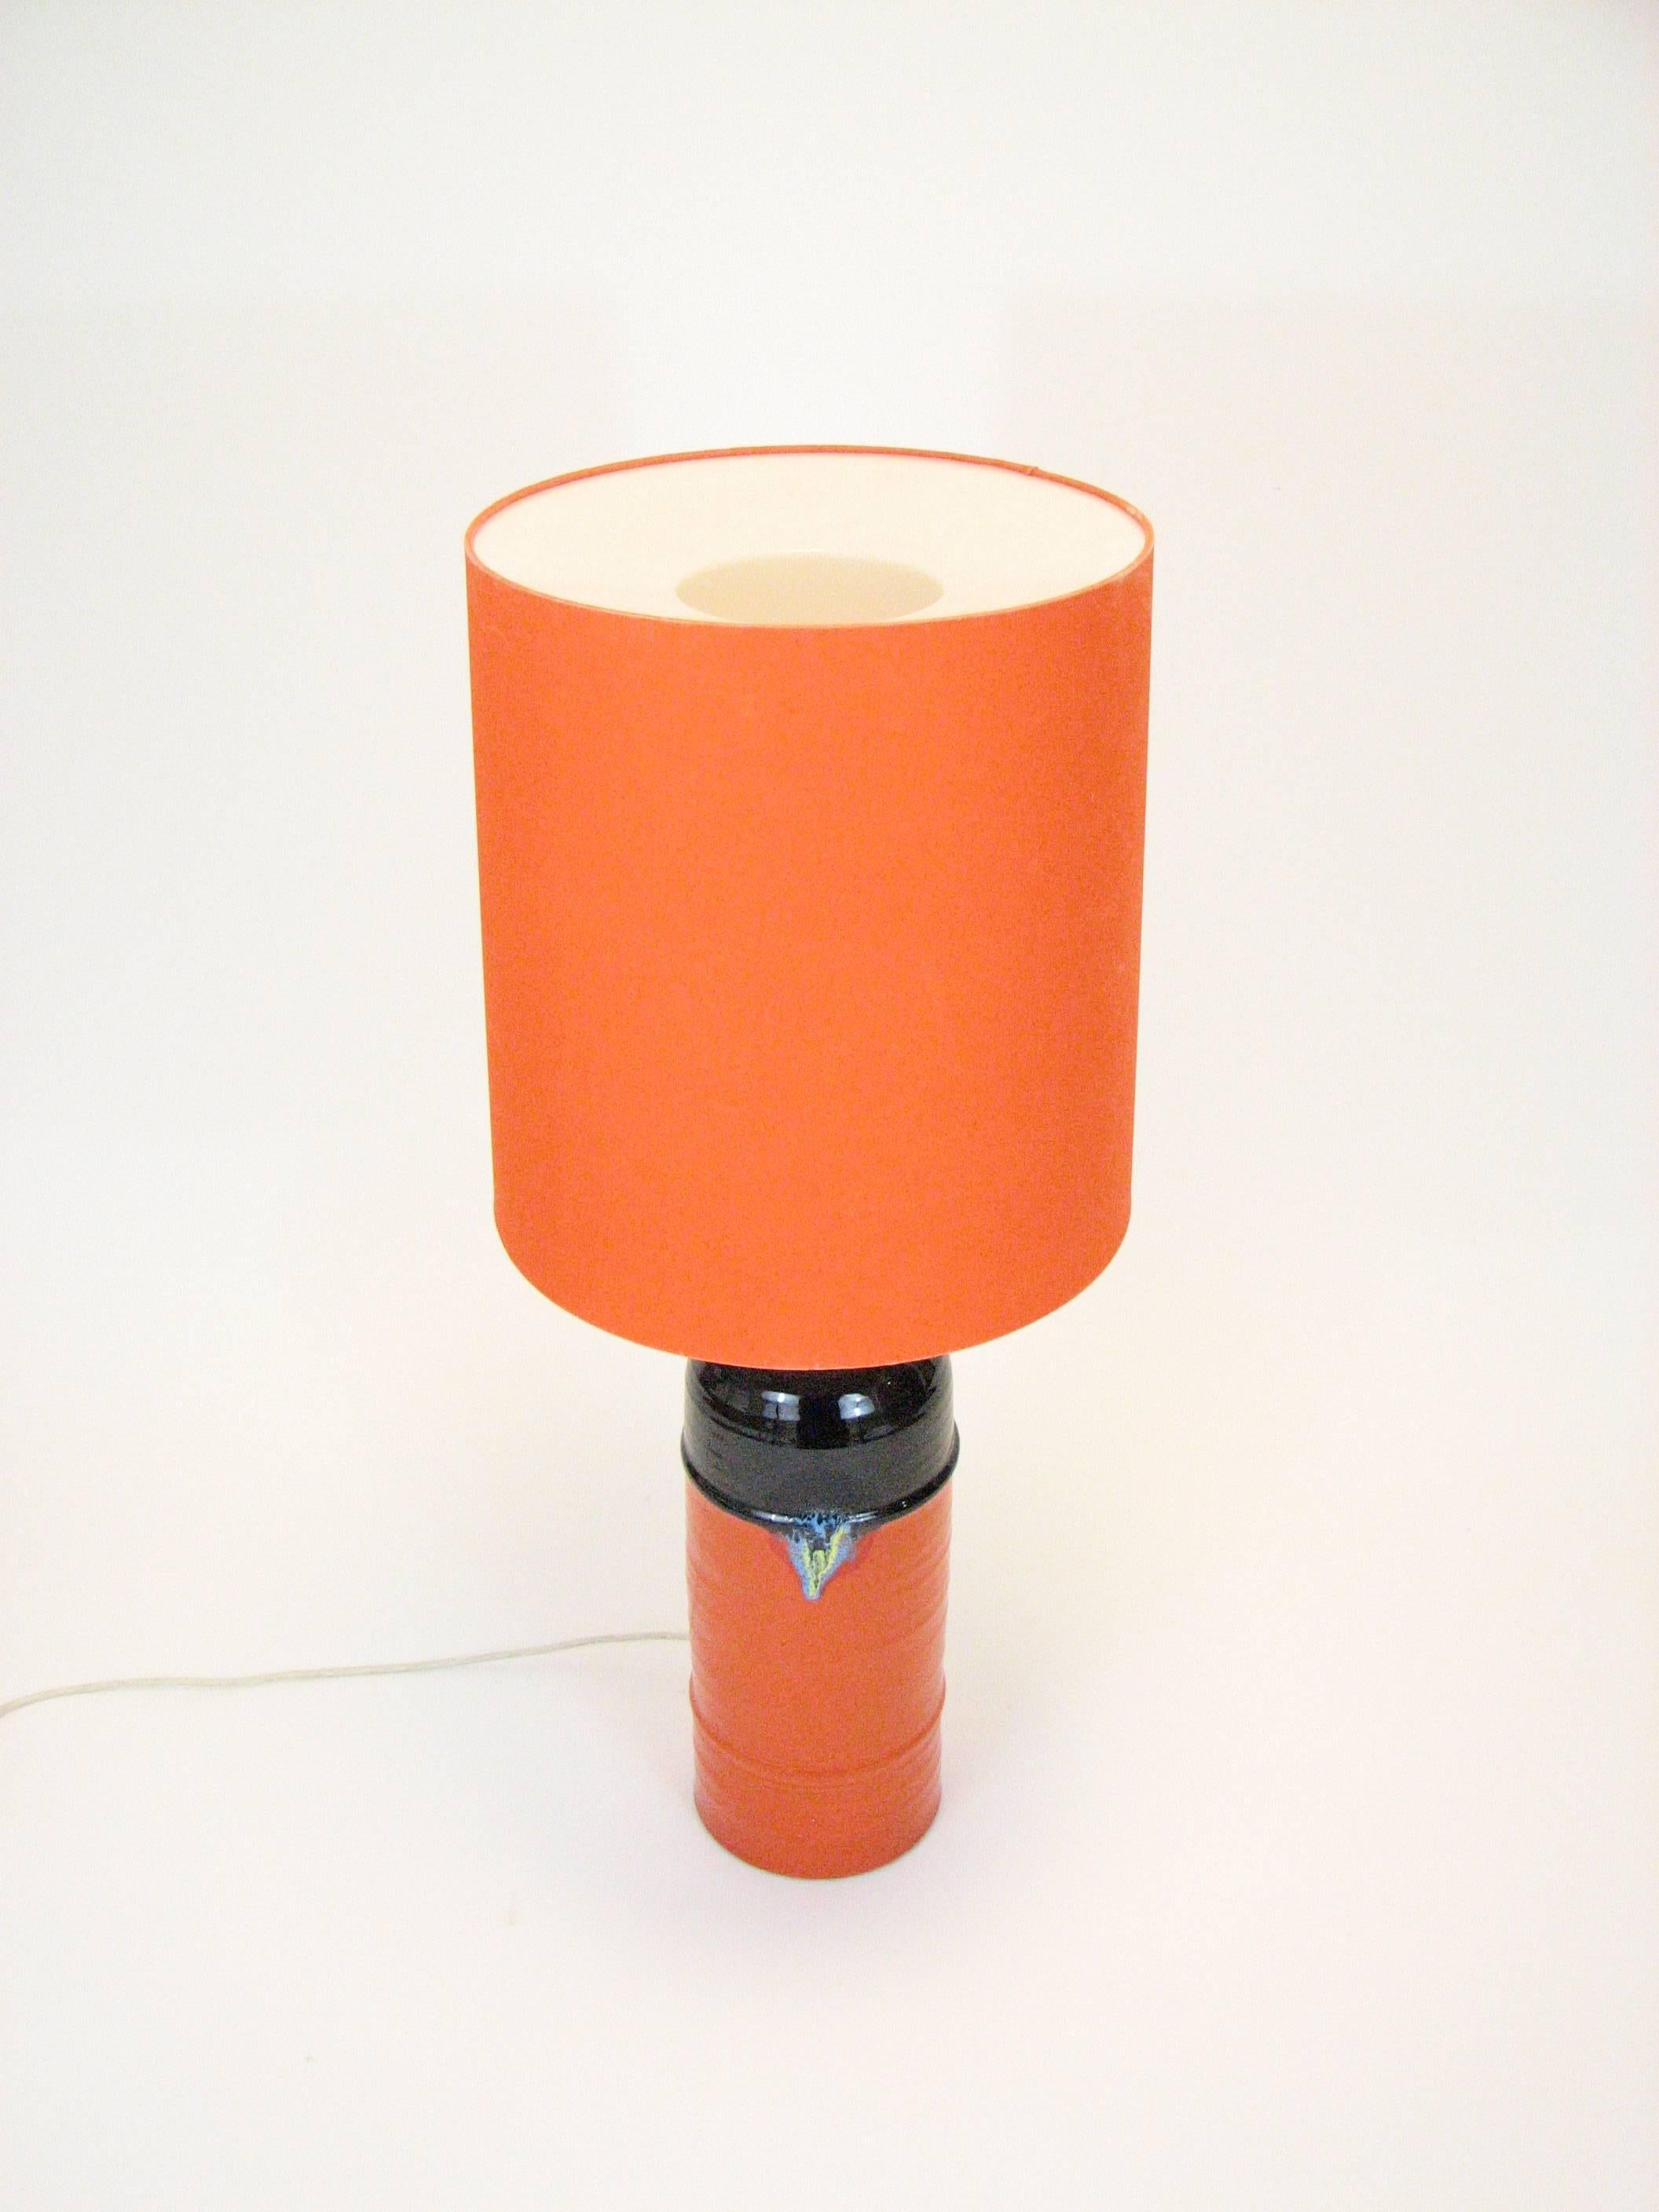 An extremely rare large-scale glazed and signed table lamp with original shade by Danish designer Bjorn Wiinblad for Rosenthal GmbH of Germany. The lamp features a turqoise, yellow and red focal point on an orange and black ceramic base, and a